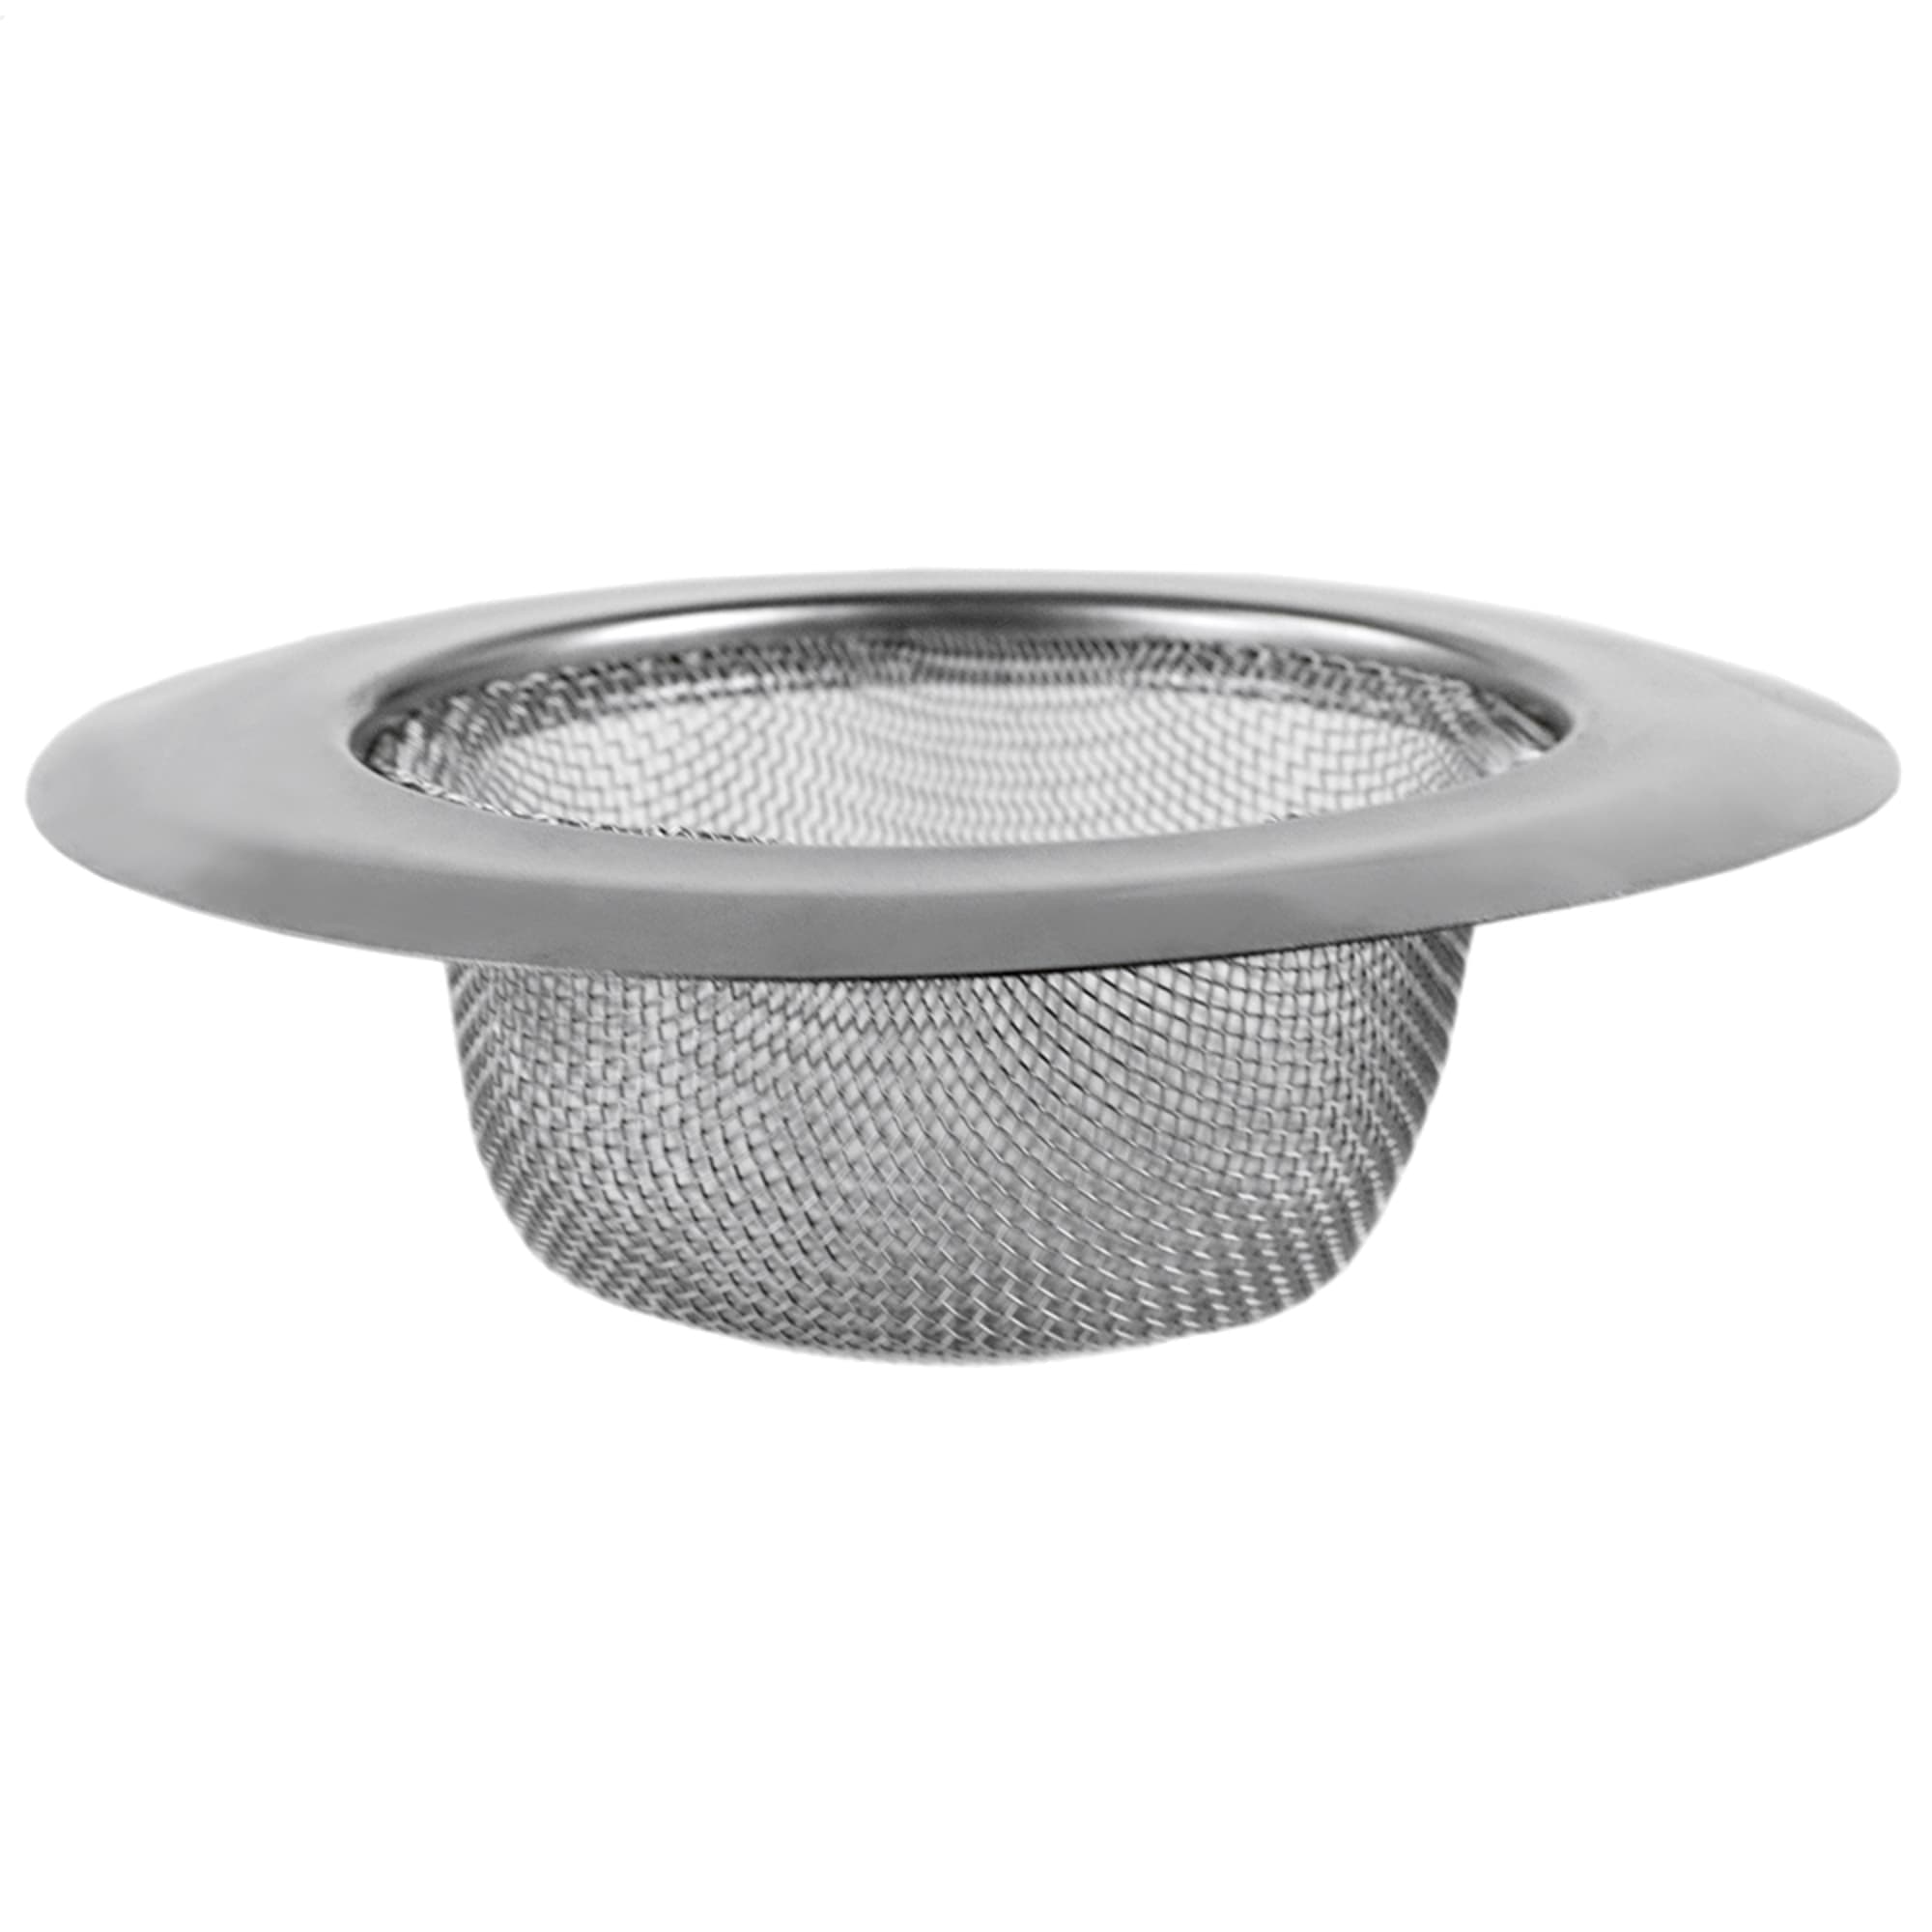 Home Basics 4.5" Stainless Steel Sink Strainer $1.00 EACH, CASE PACK OF 48